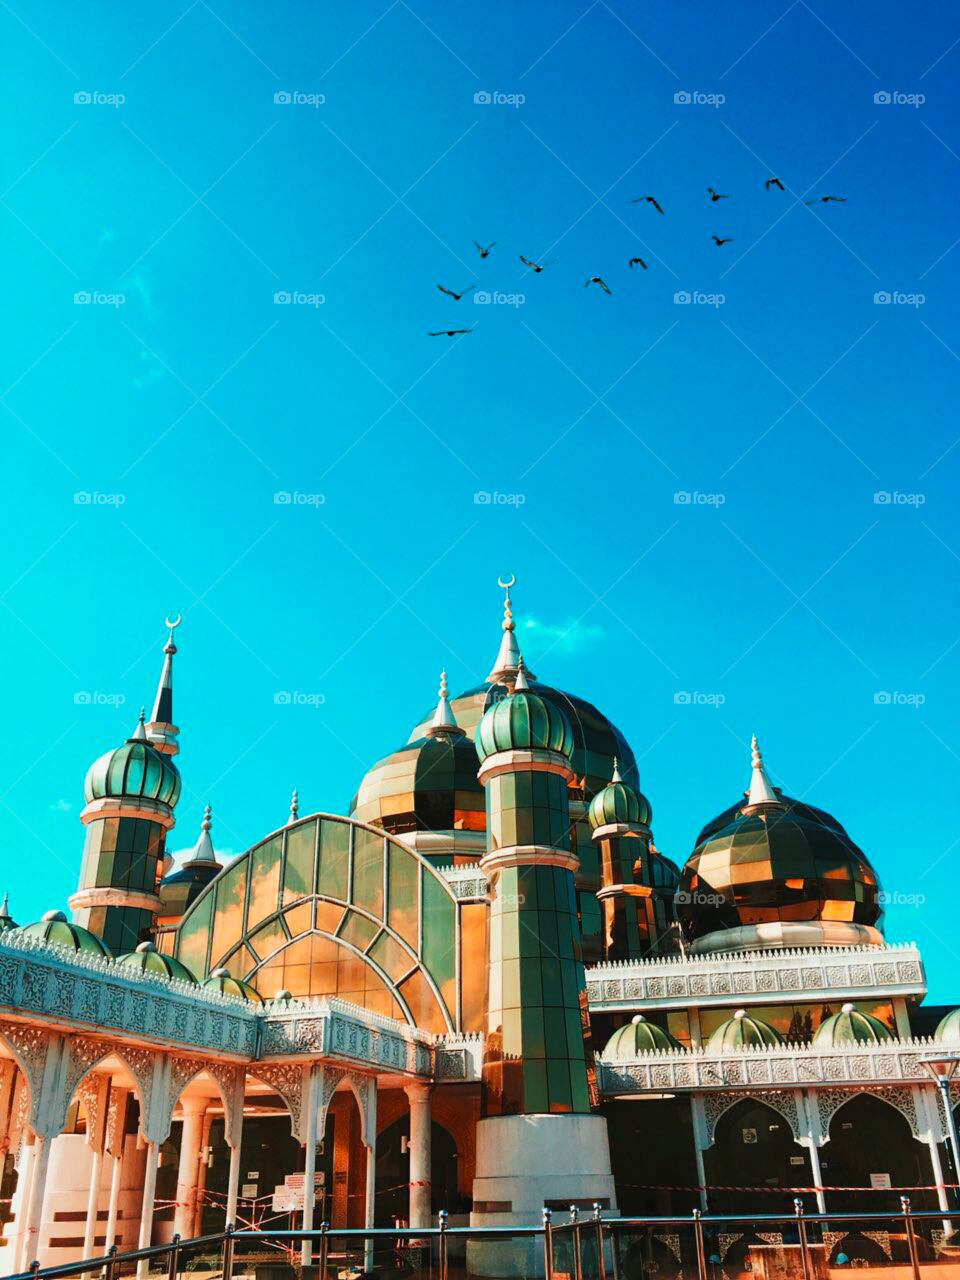 crystal mosque . shoot by someone else but edited by me 😅